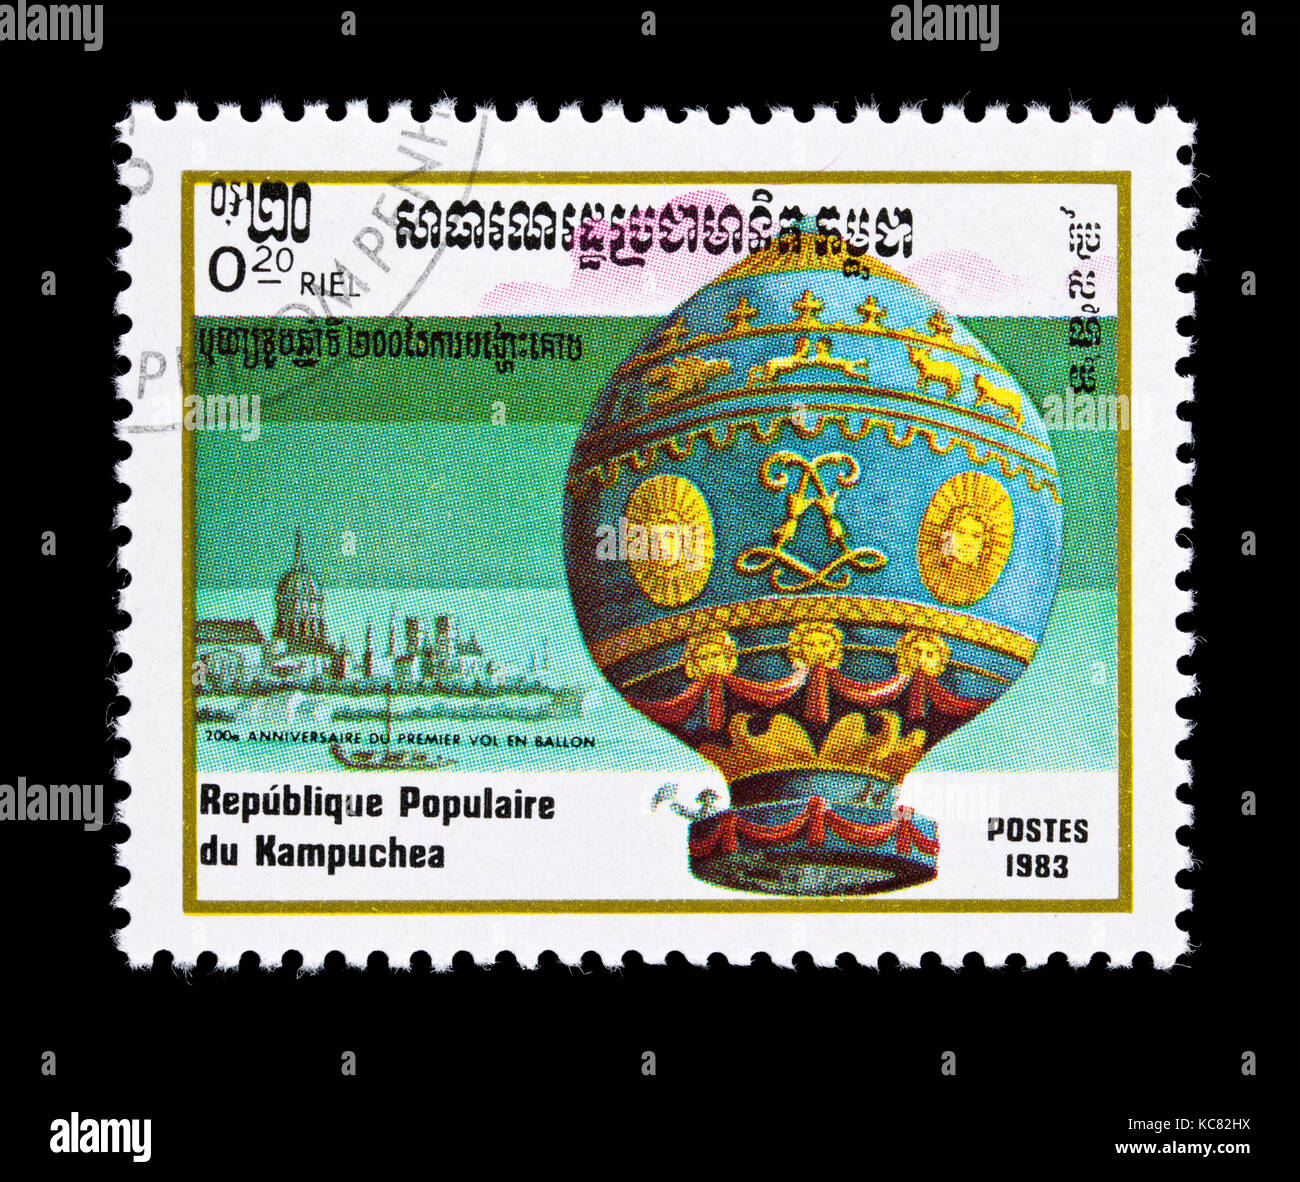 Postage stamp from Cambodia (Kampuchea) depicting Montgolfier  hot air balloon, bicentennial of first hot air balloon flight. Stock Photo